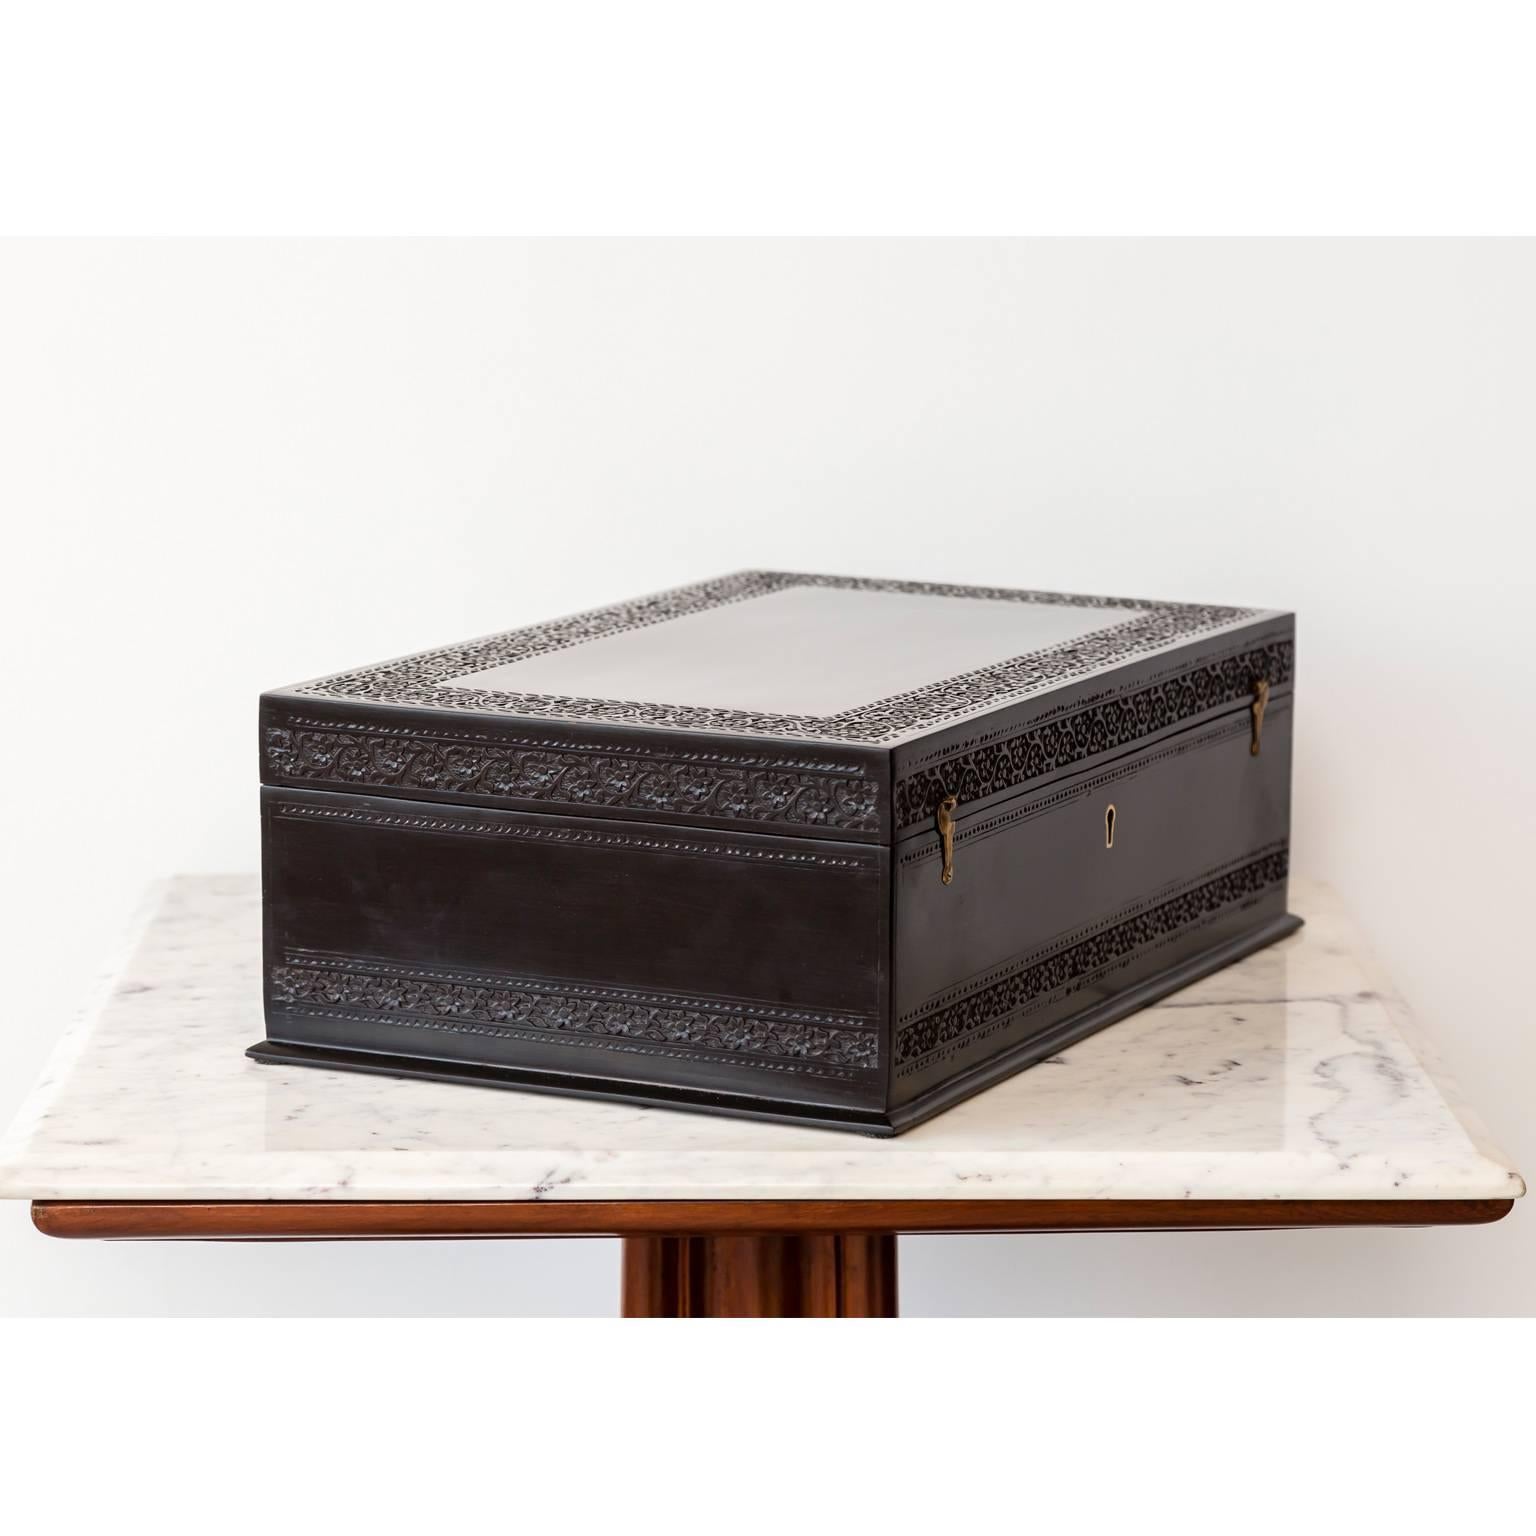 Antique Anglo-Indian or British Colonial Ebony Dressing Box 1